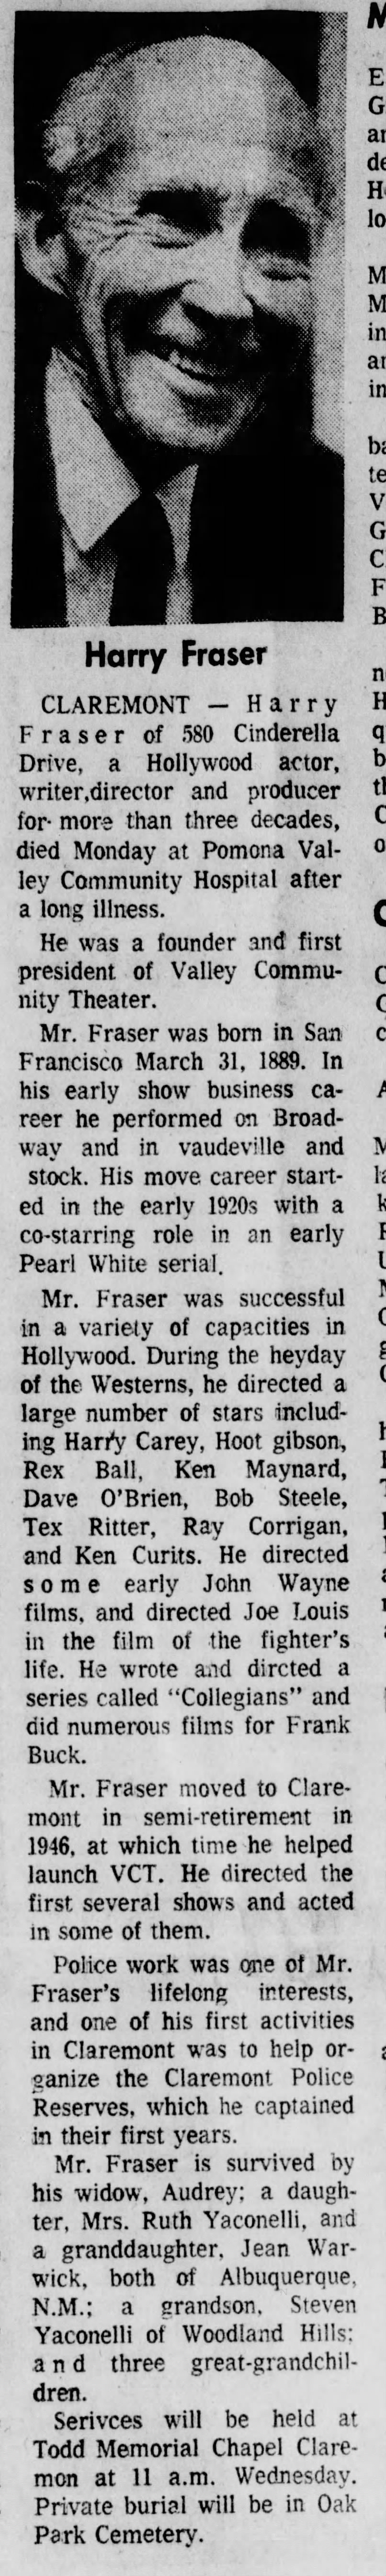 Death notice on movie director Harry Fraser.  He directed scores of westerns in early Hollywood.